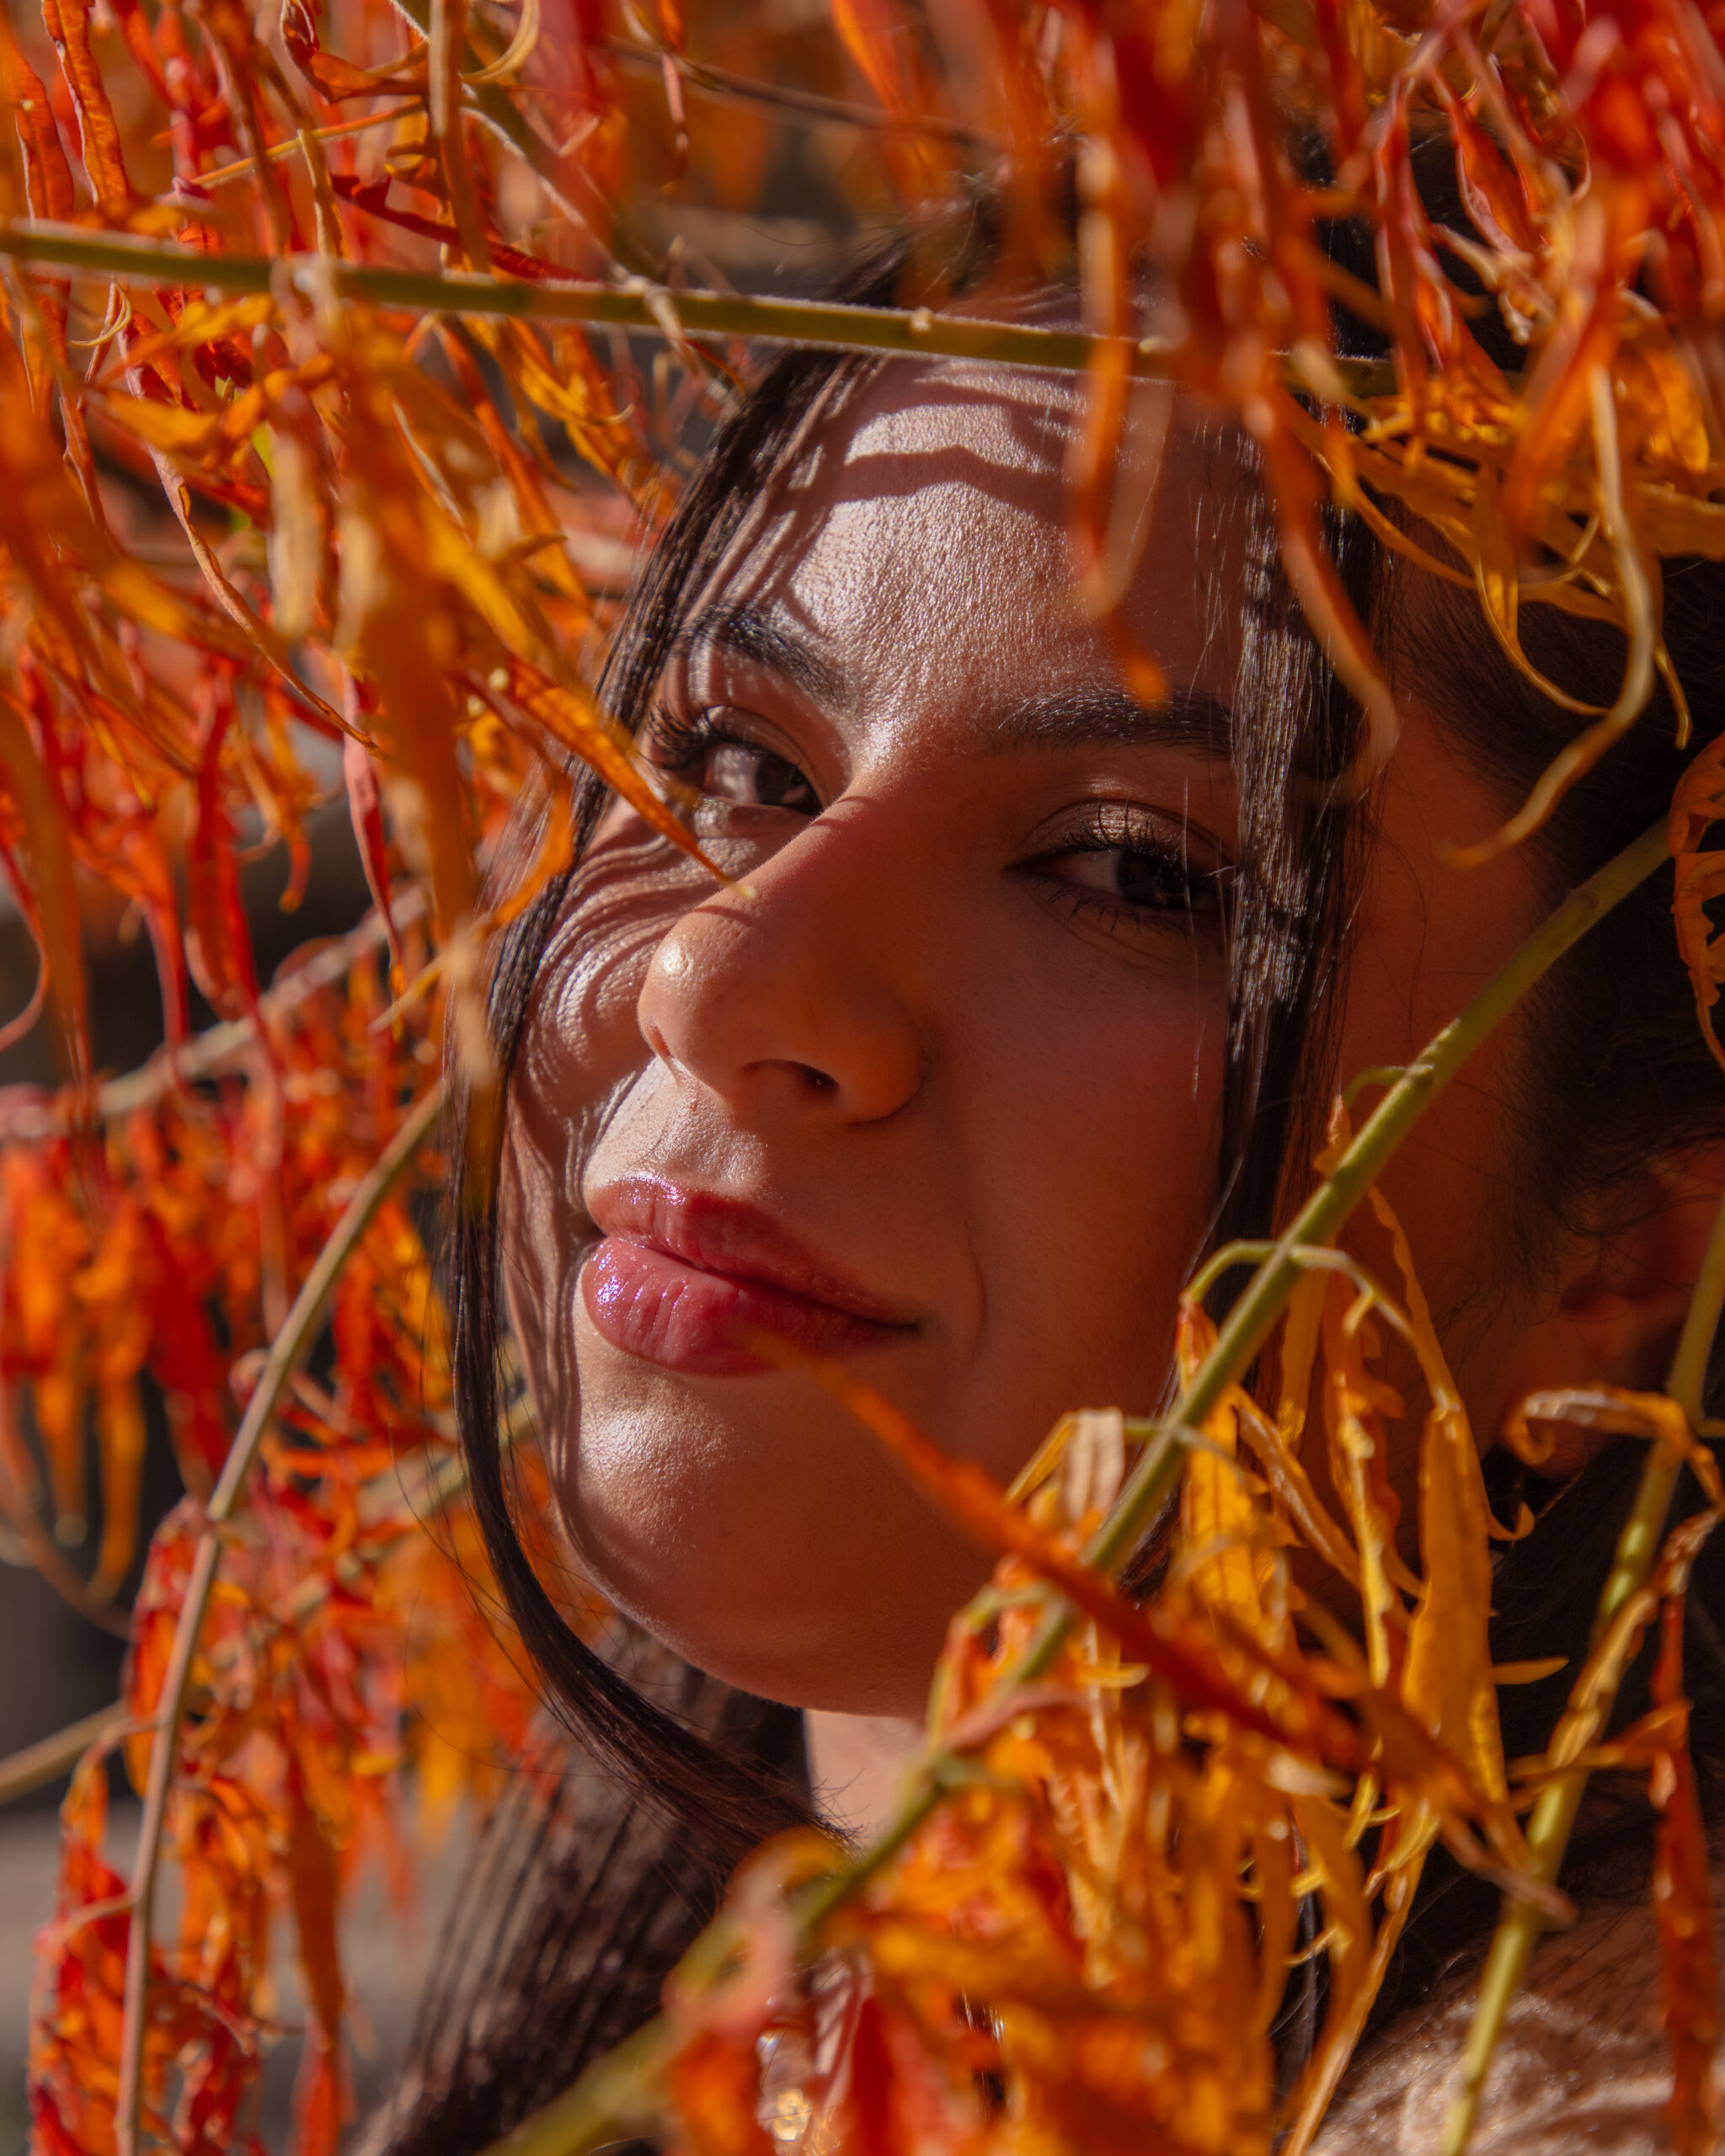 In the photograph, a woman with dark hair tilts her face upwards while her eyes look directly into the camera. Orange foliage surrounds her face, with sunlight highlighting her features. She wears lip gloss, and the interplay of light and shadows creates a vivid texture across the image.
